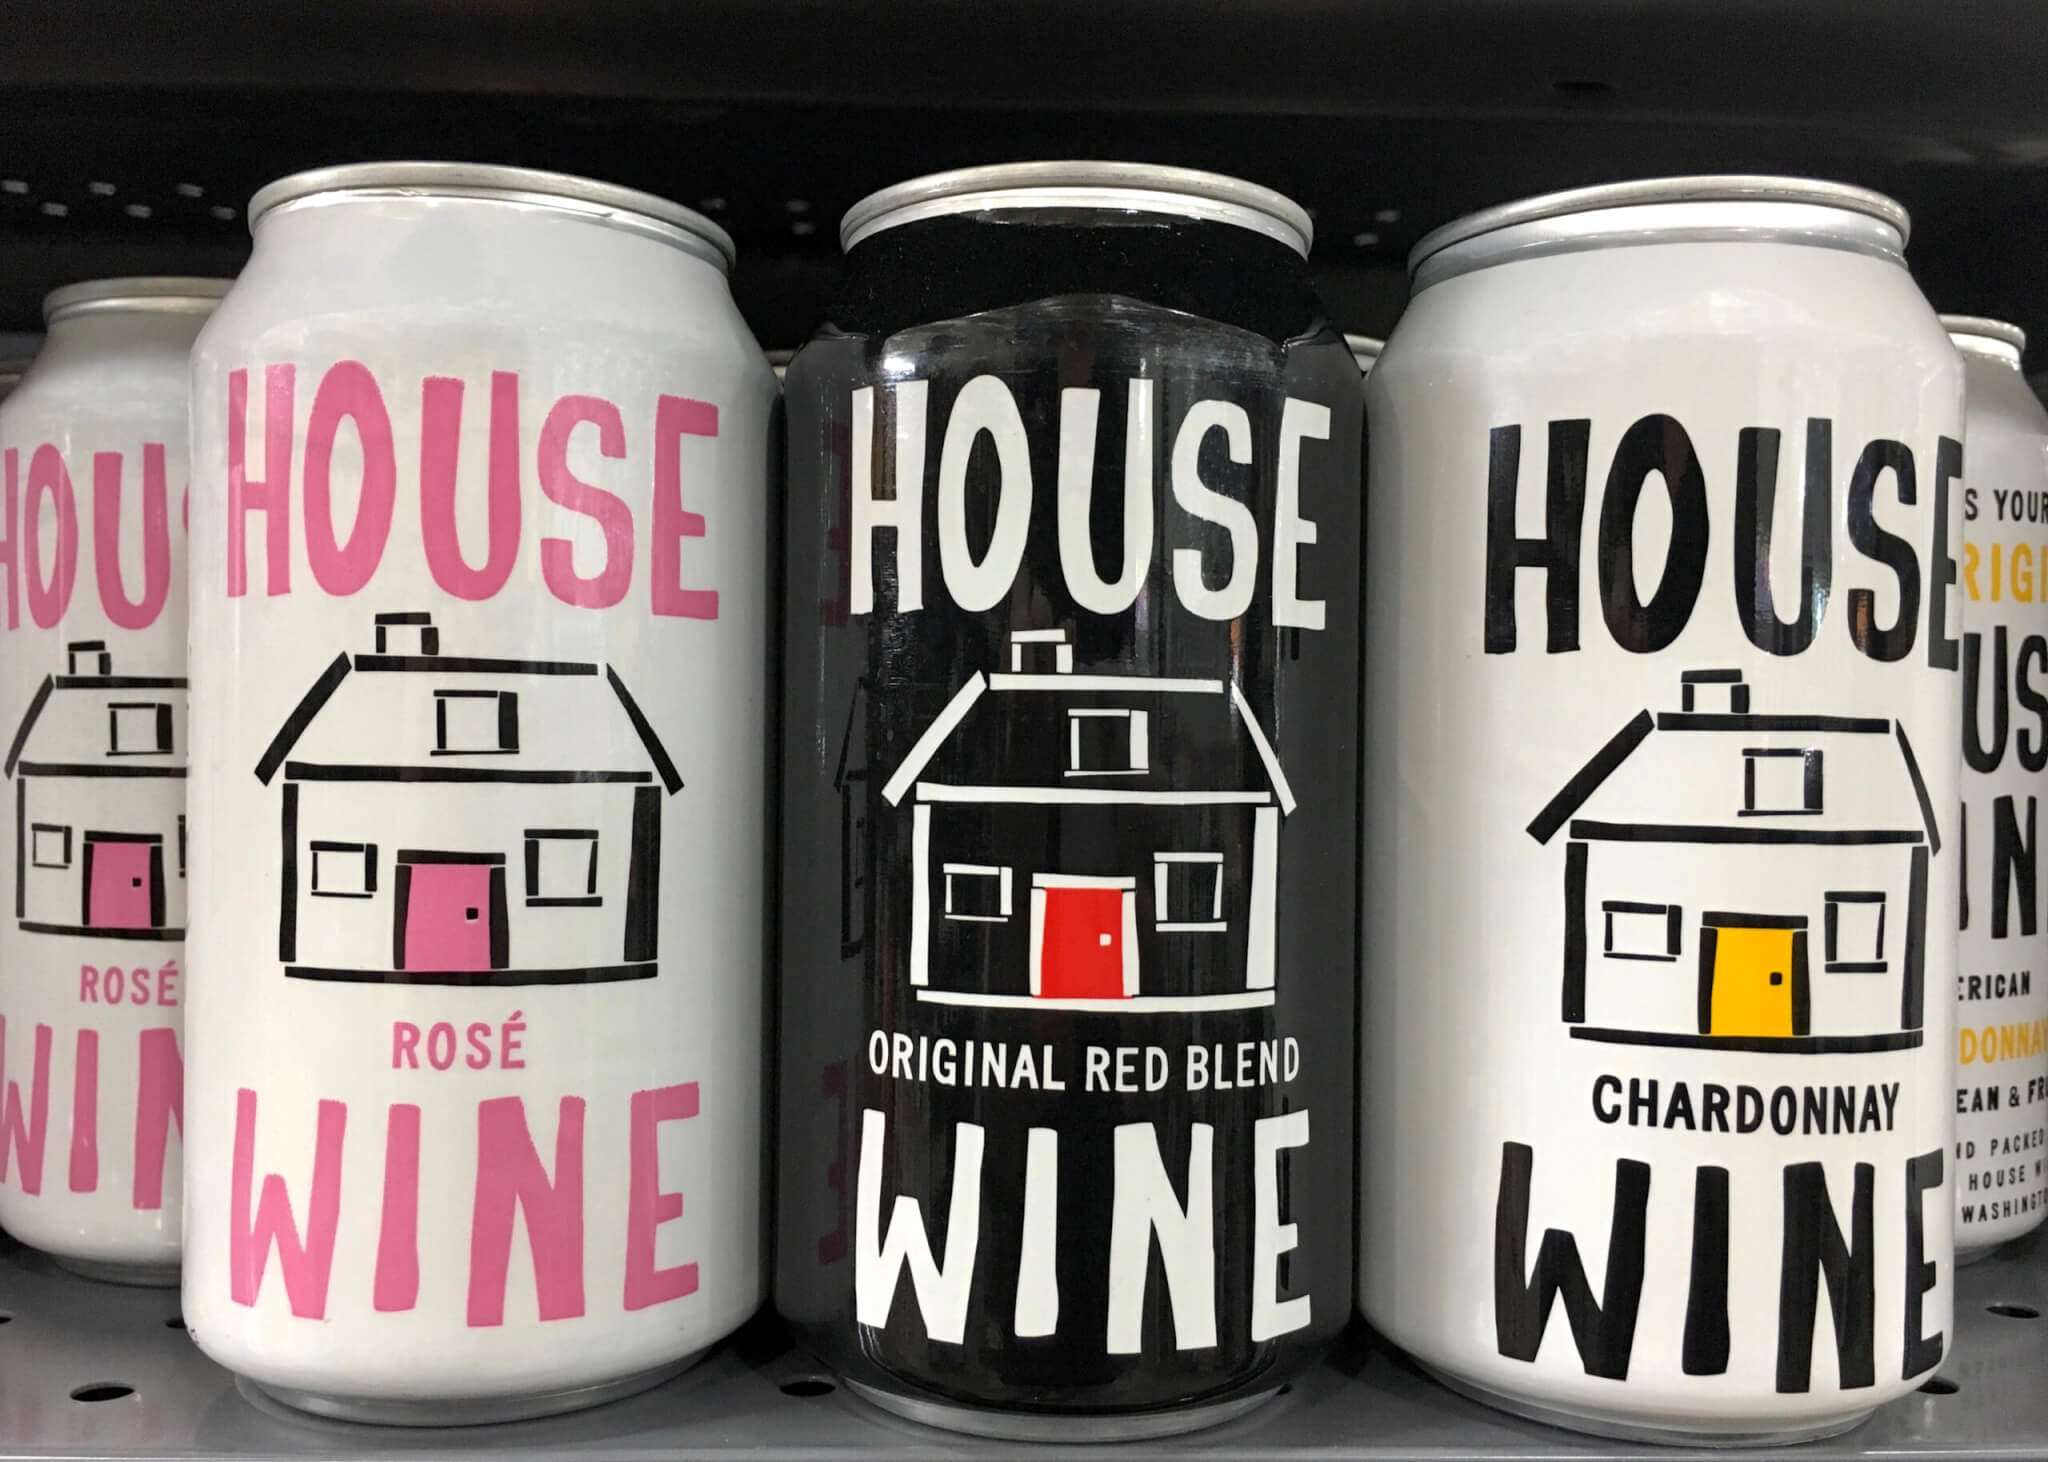 Canned House Wine